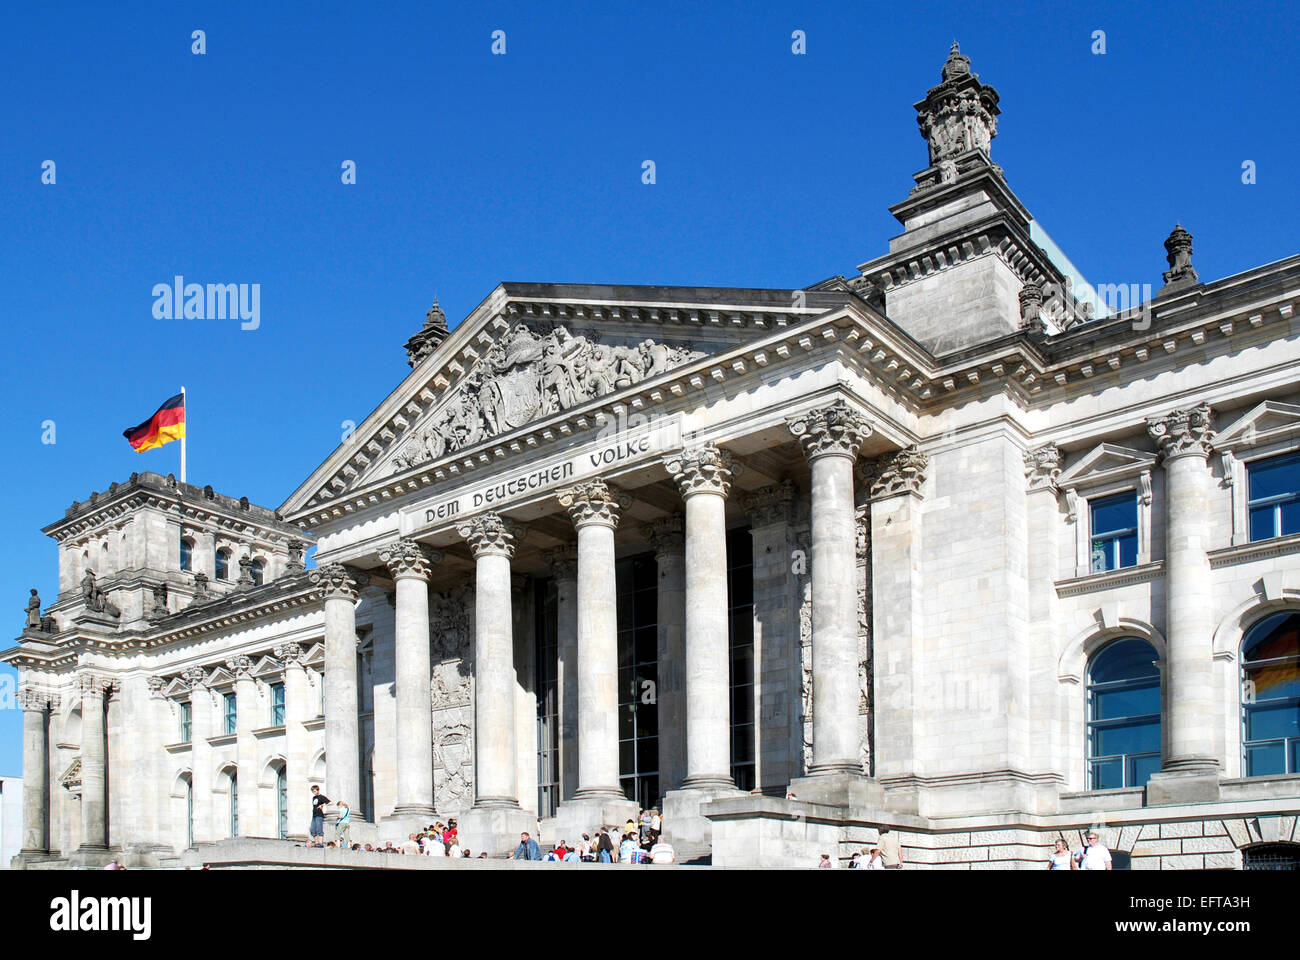 Tourists in front of the Reichstag building in Berlin - Seat of the German Parliament. Stock Photo